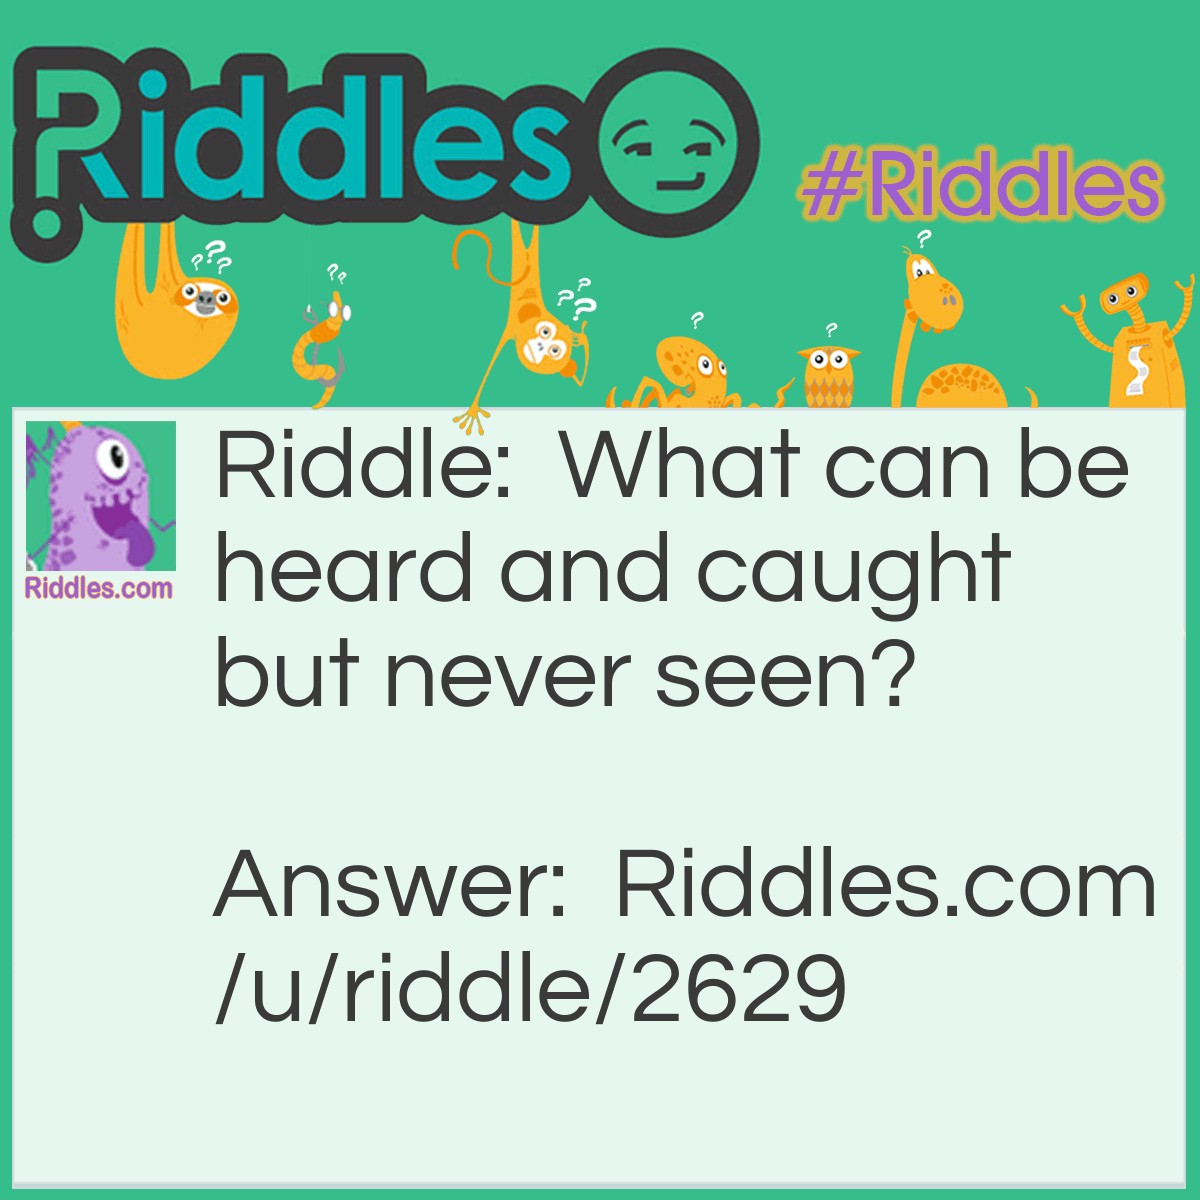 Riddle: What can be heard and caught but never seen? Answer: A Remark!